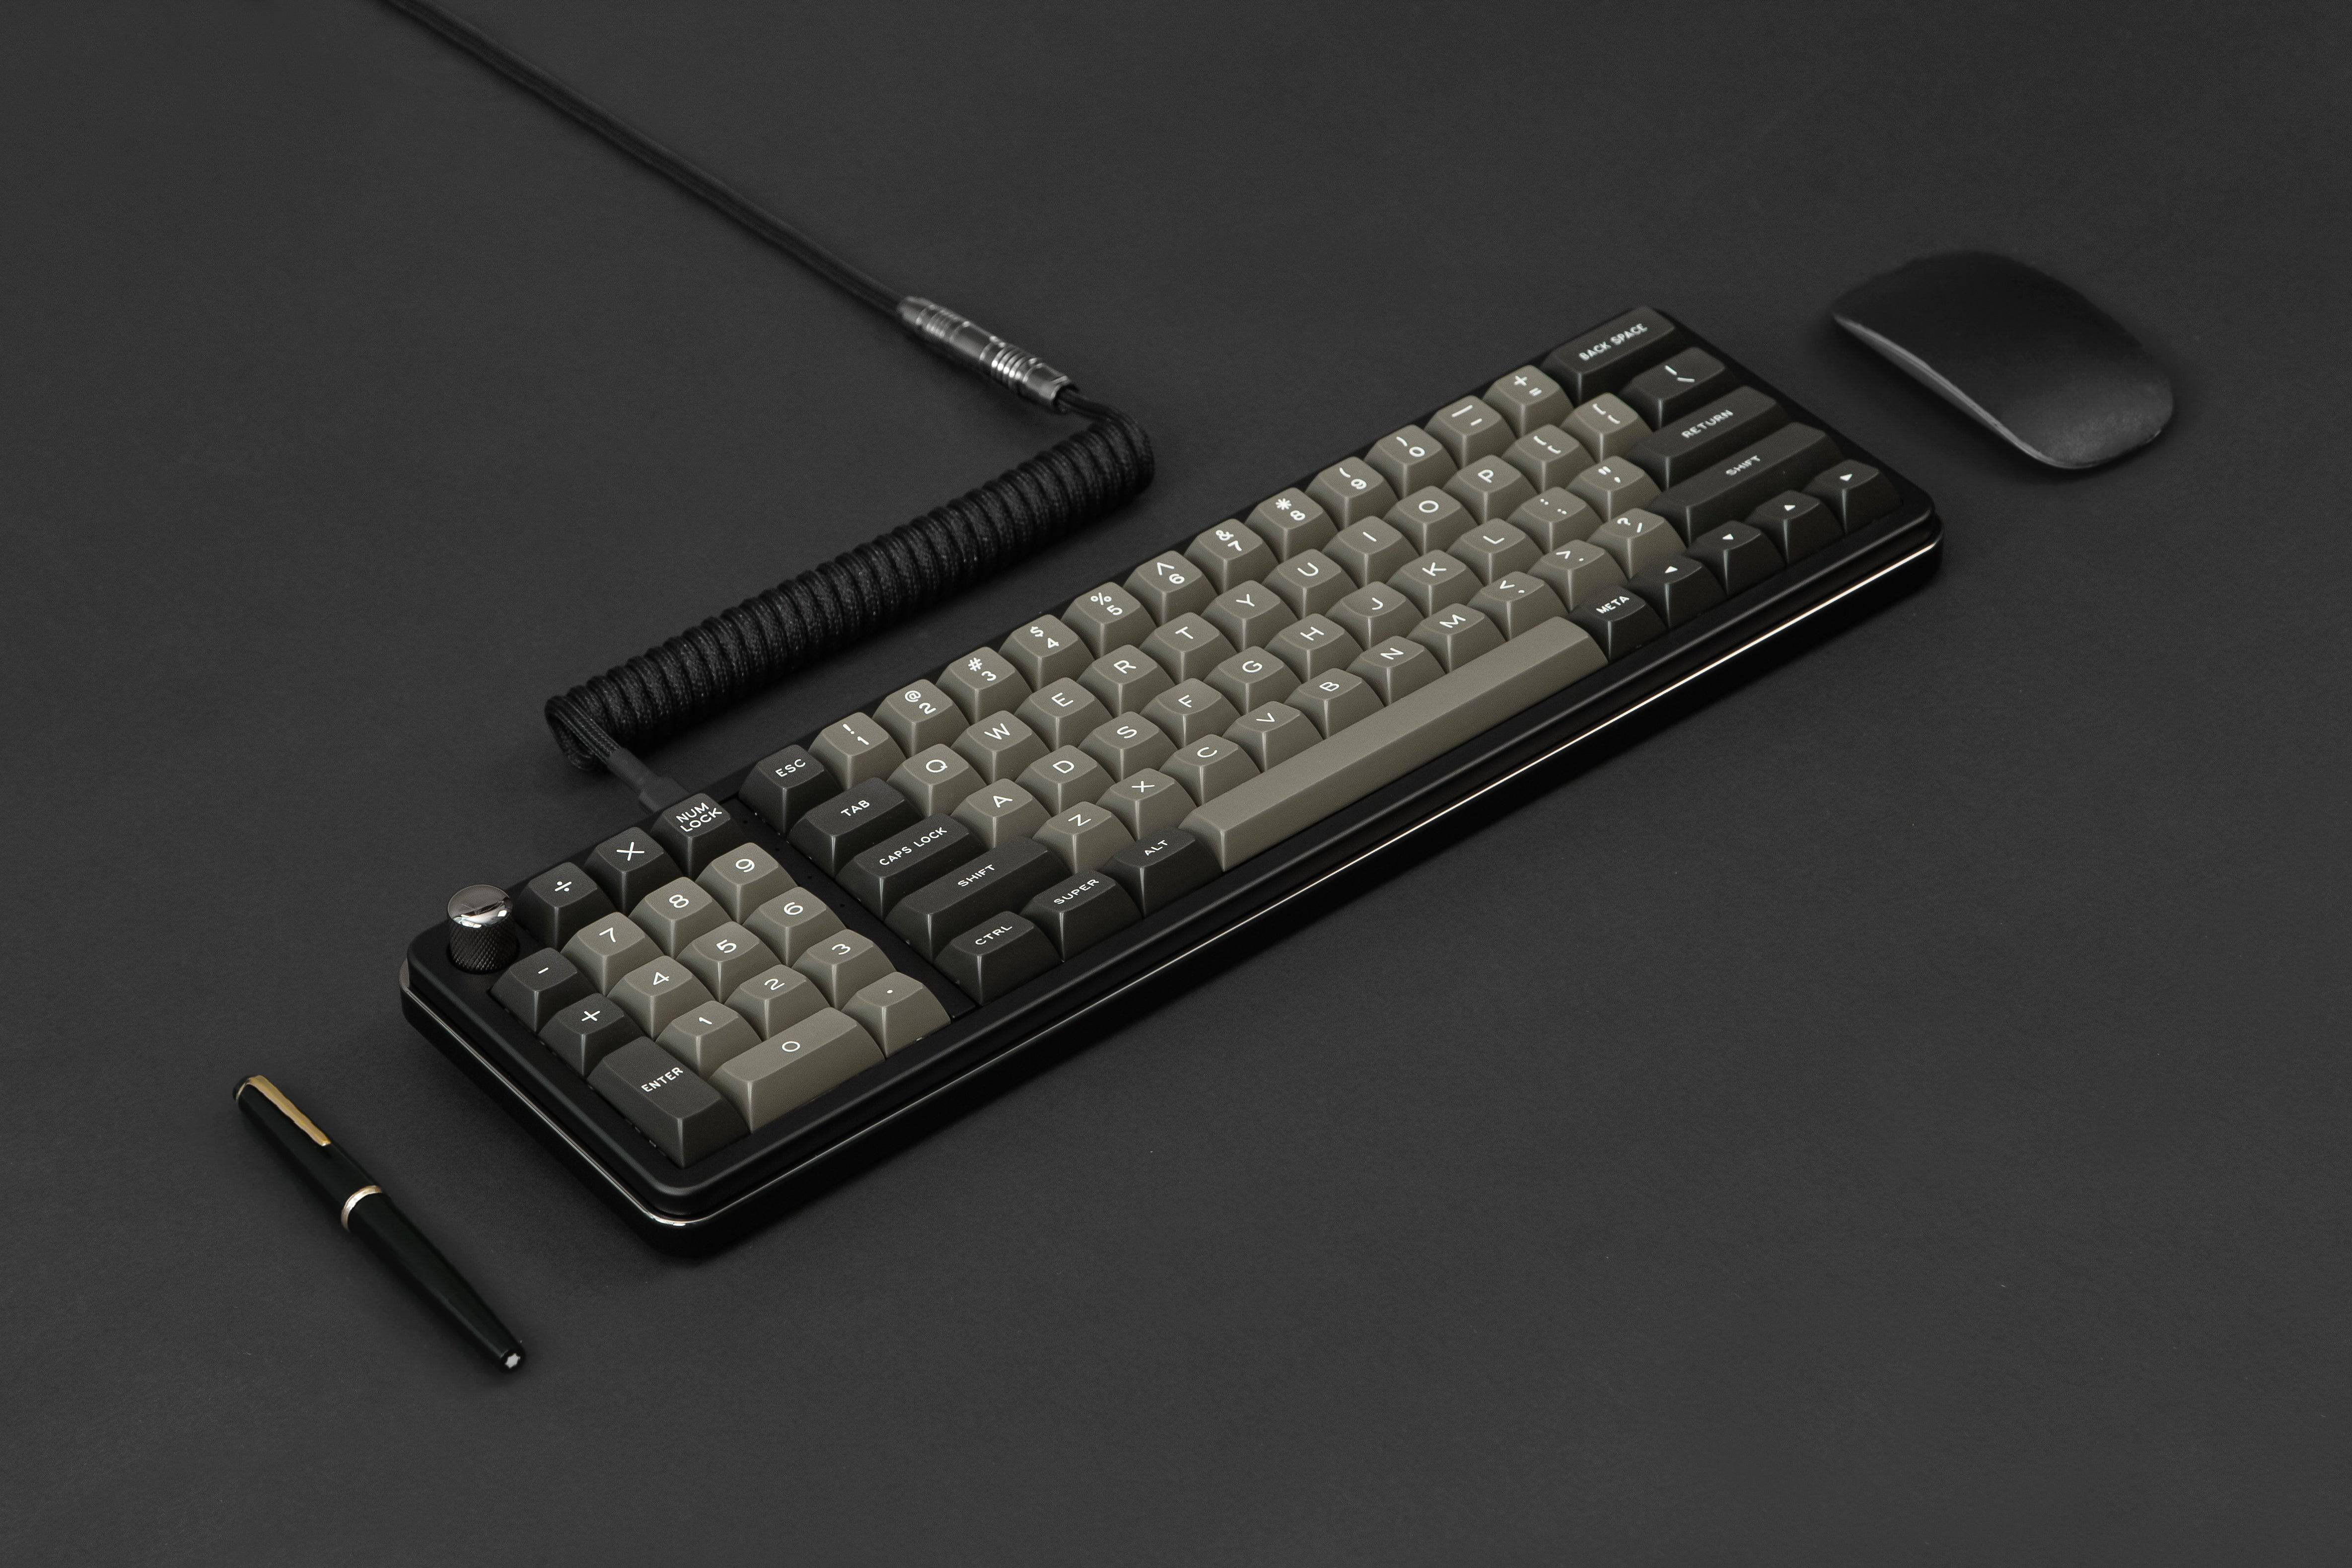  Viendi 8L keyboard and coiled cable shown in the Nero color variant proxied by KeebsForAll